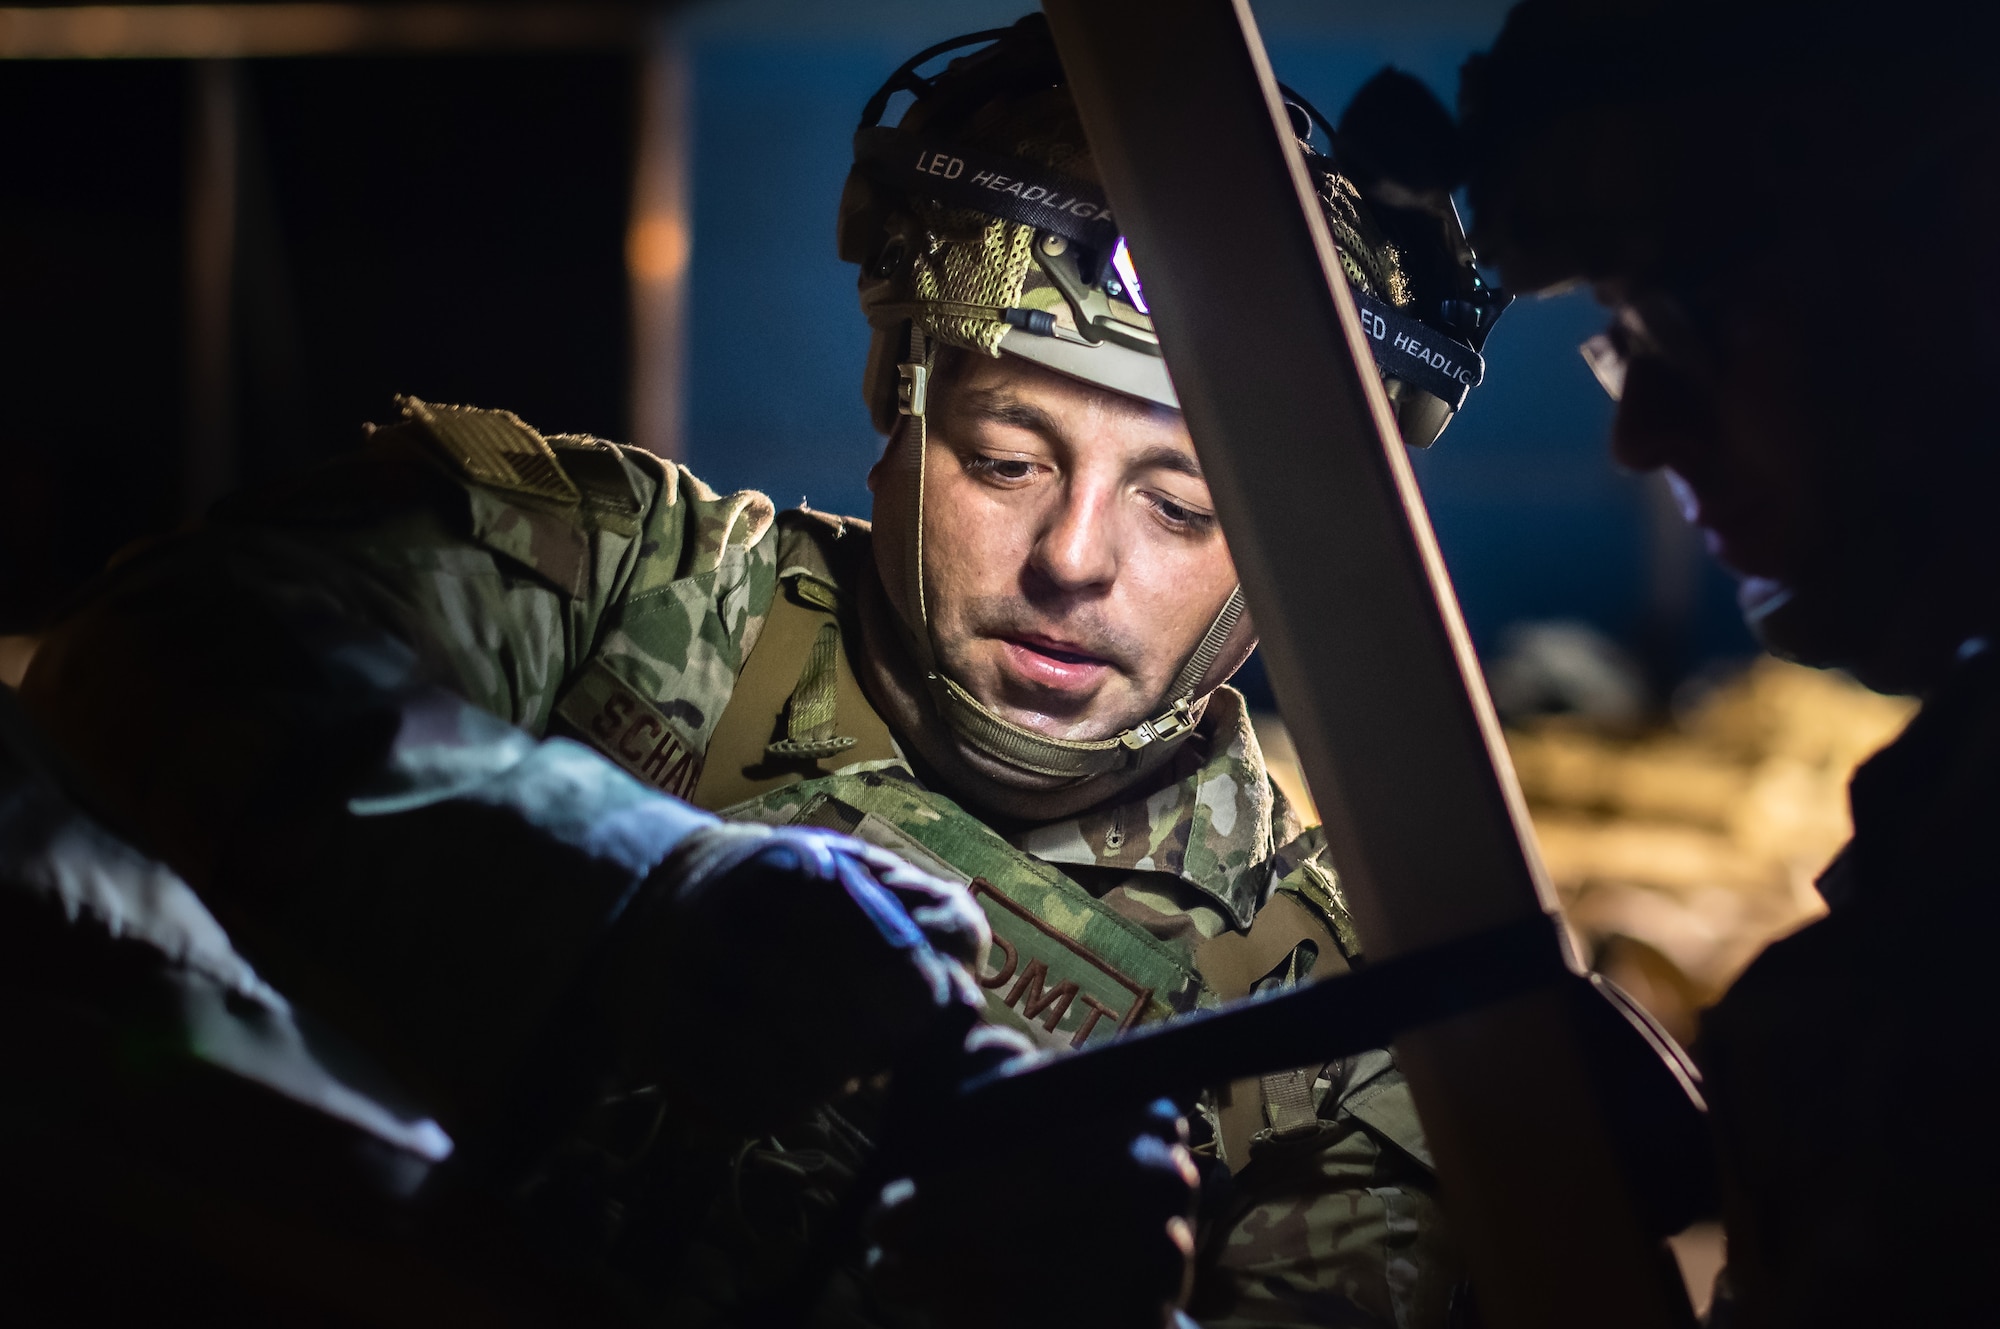 U.S. Air Force Master Sgt. Robert Schaffer, 435th Contingency Response Support Squadron independent duty medical technician, sets up a medical tent during exercise Agile Wolf 22 at Koszalin, Poland, Sept. 12, 2022. The 435th Contingency Response Group is USAFE's only expeditionary open-the-base force, comprising 39 career fields which allow them to set up and run a fully functioning base within hours. (U.S. Air Force photo by Airman 1st Class Jared Lovett)